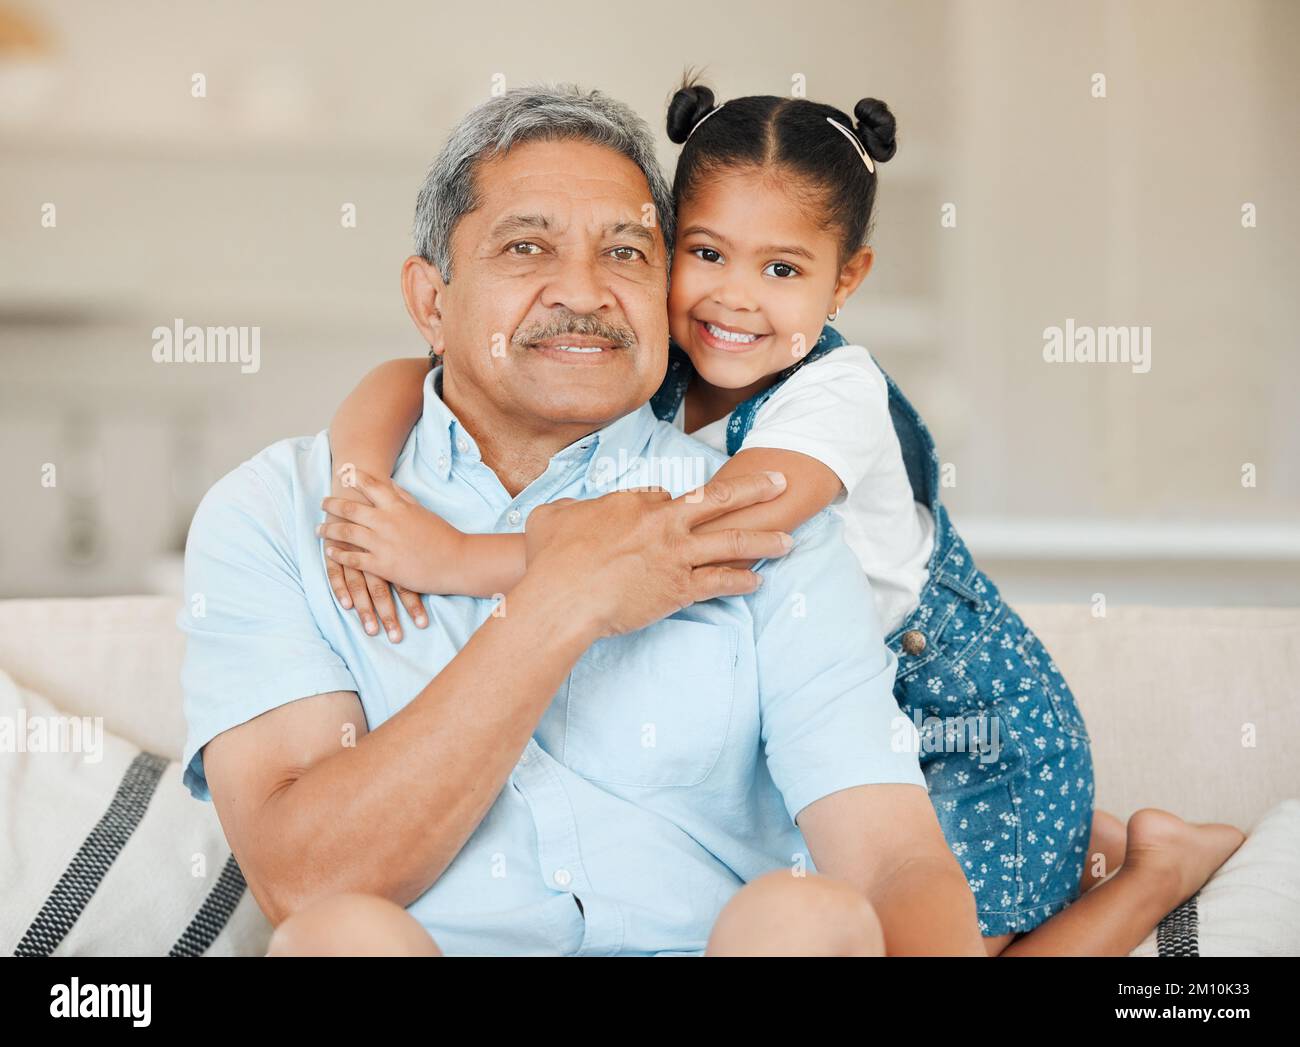 There is no doubt that it is around the family. a grandfather and granddaughter bonding on the sofa at home. Stock Photo